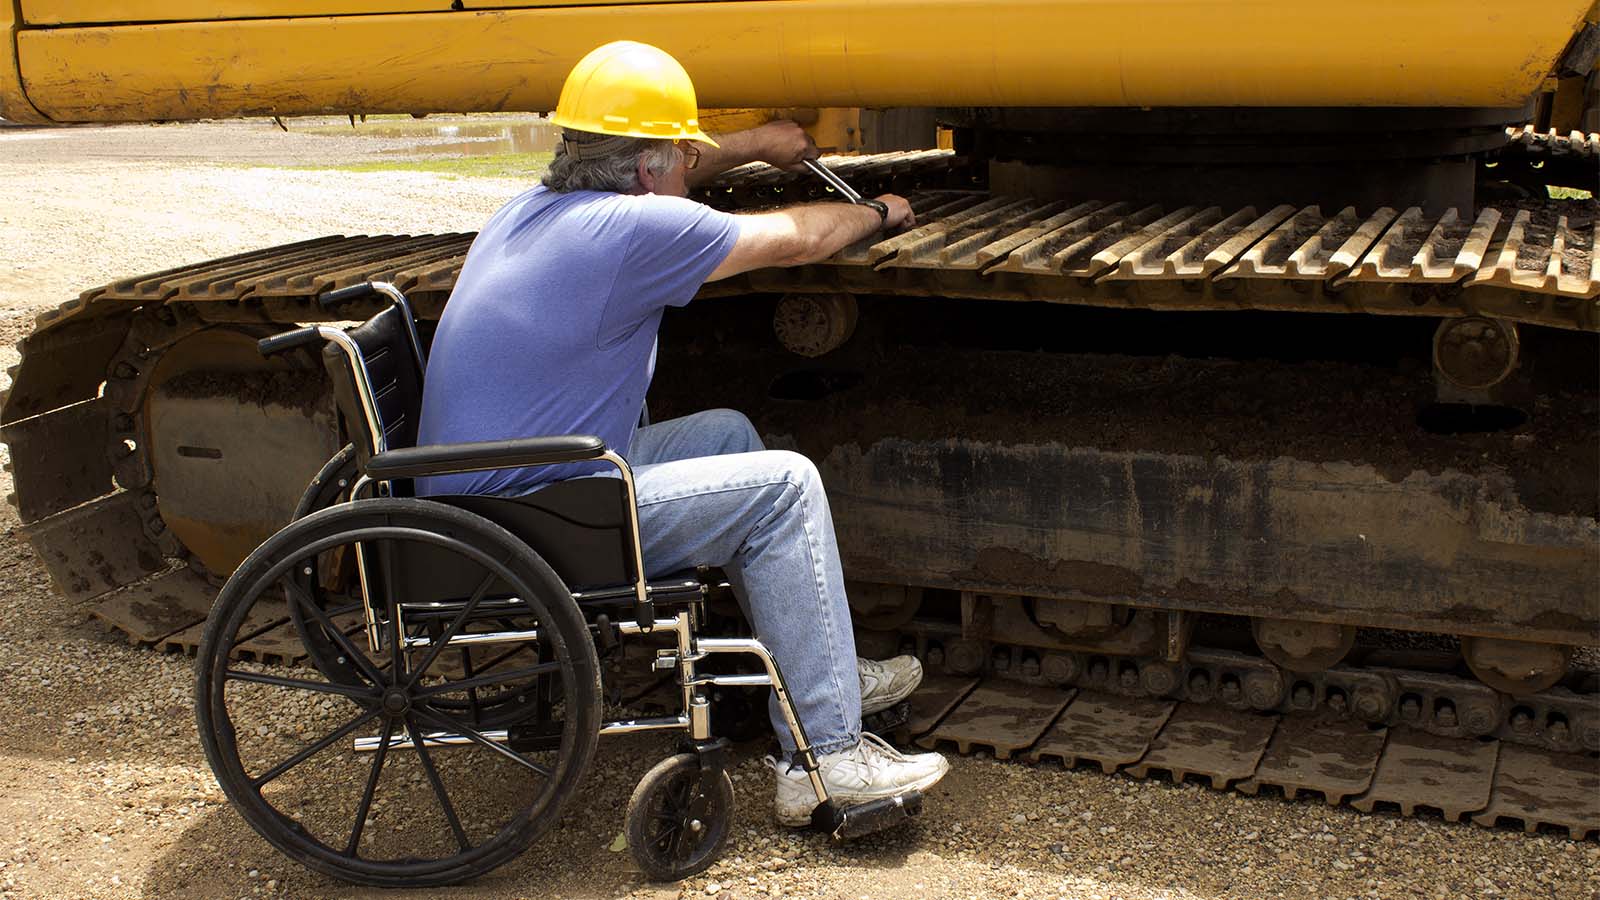 Integration of people with disabilities into the workplace (Photograph: Illustration / Shutterstock)